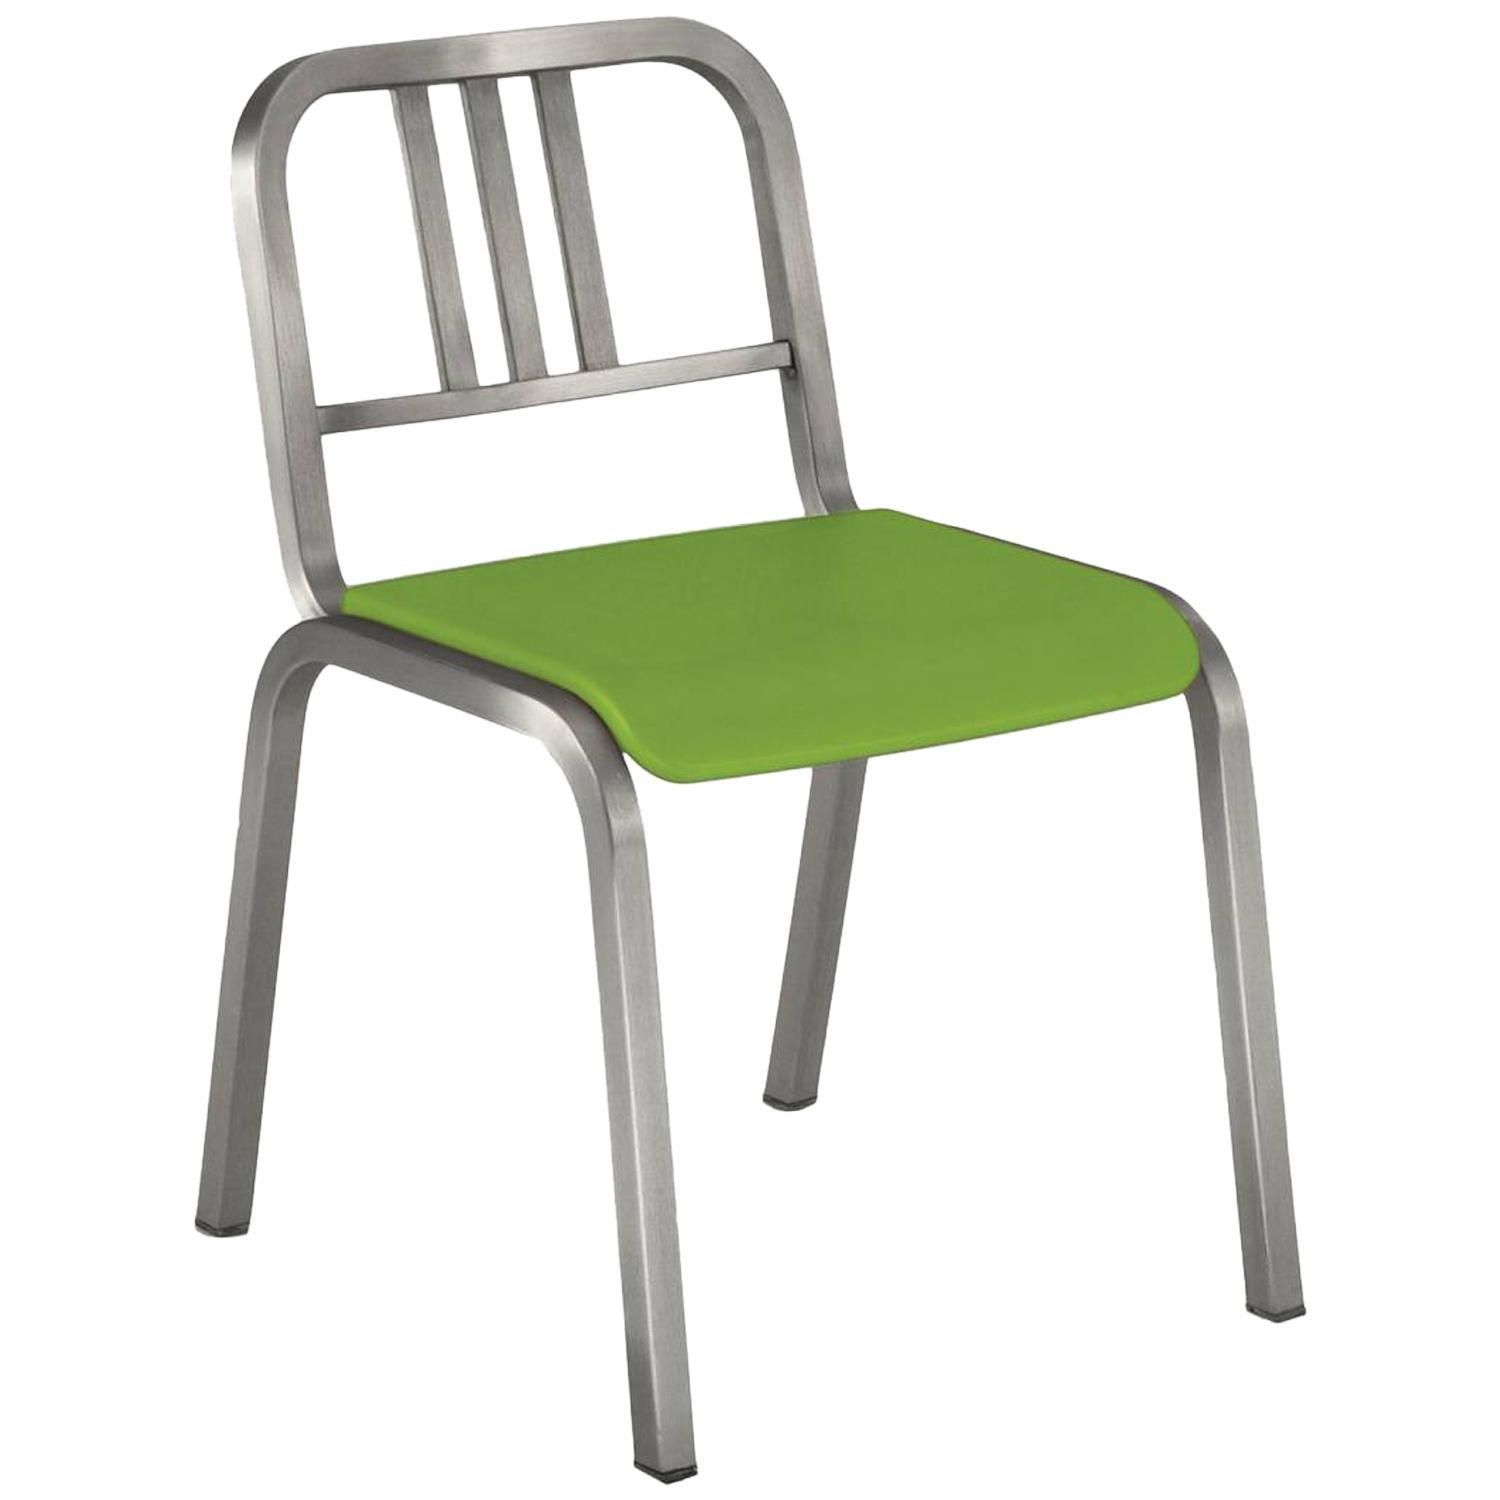 Emeco Nine-0 Chair in Brushed Aluminum with Green Seat by Ettore Sottsass